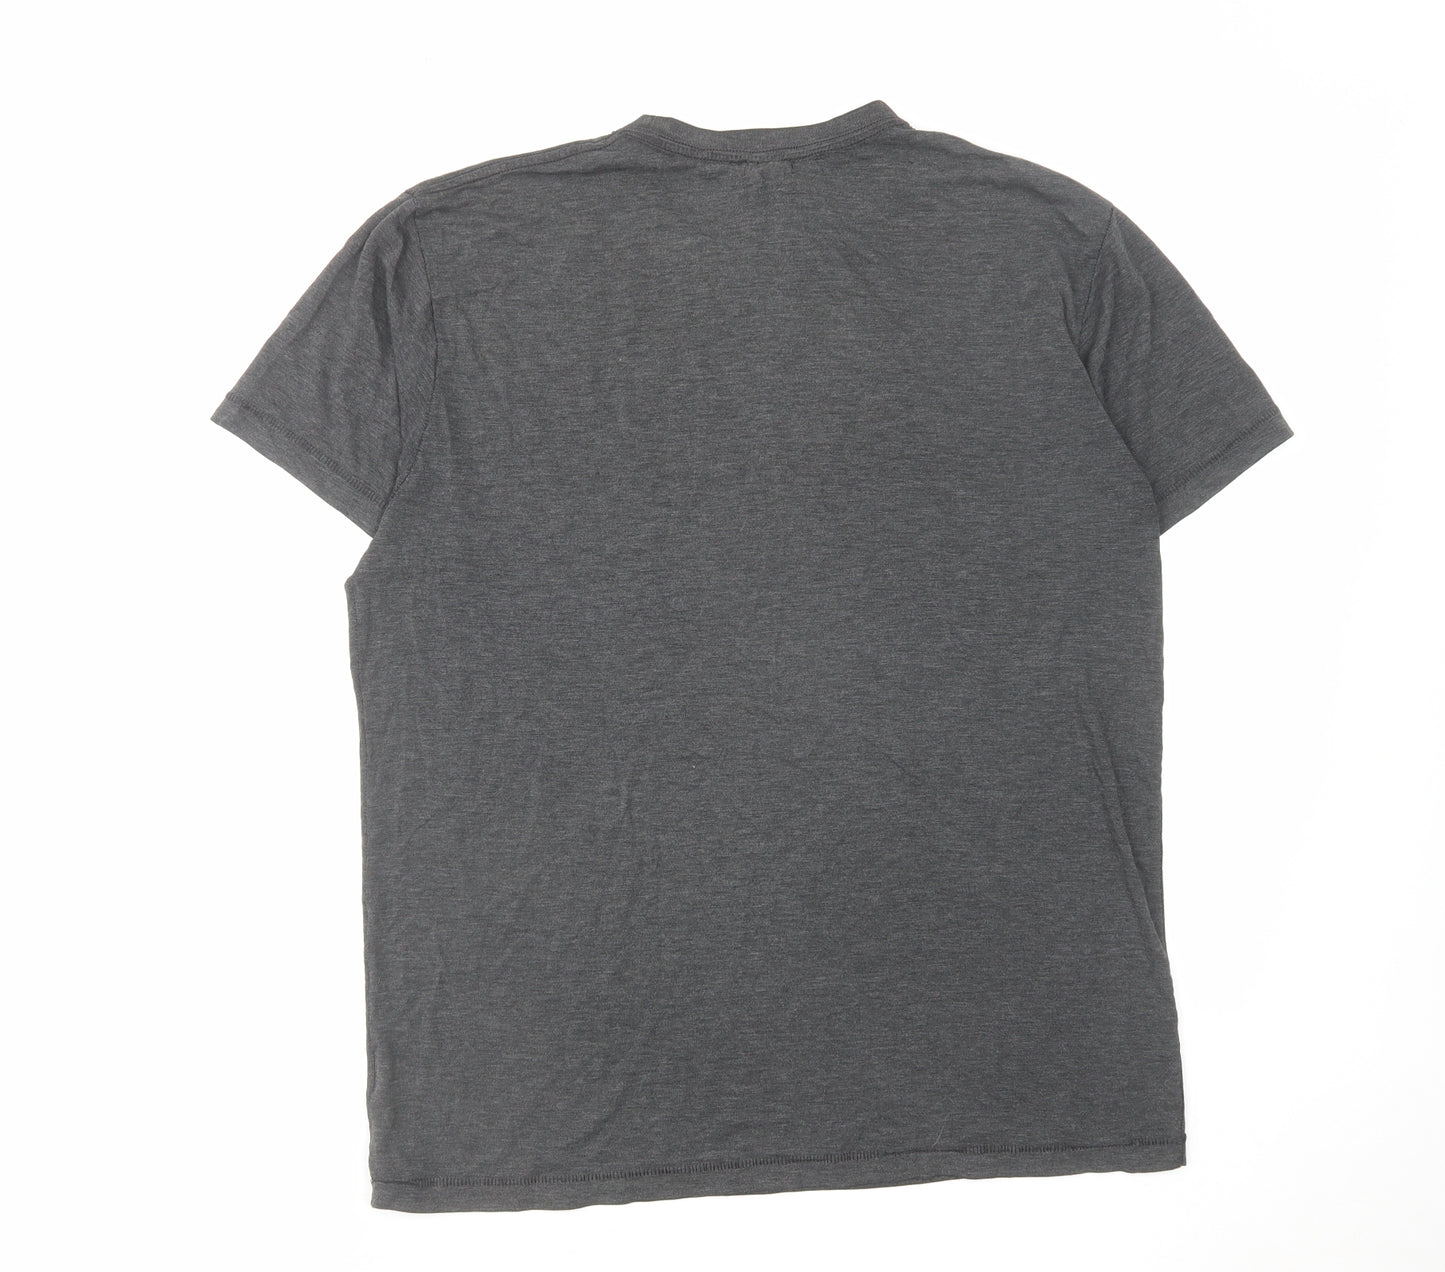 Oakley Mens Grey Polyester T-Shirt Size S Round Neck